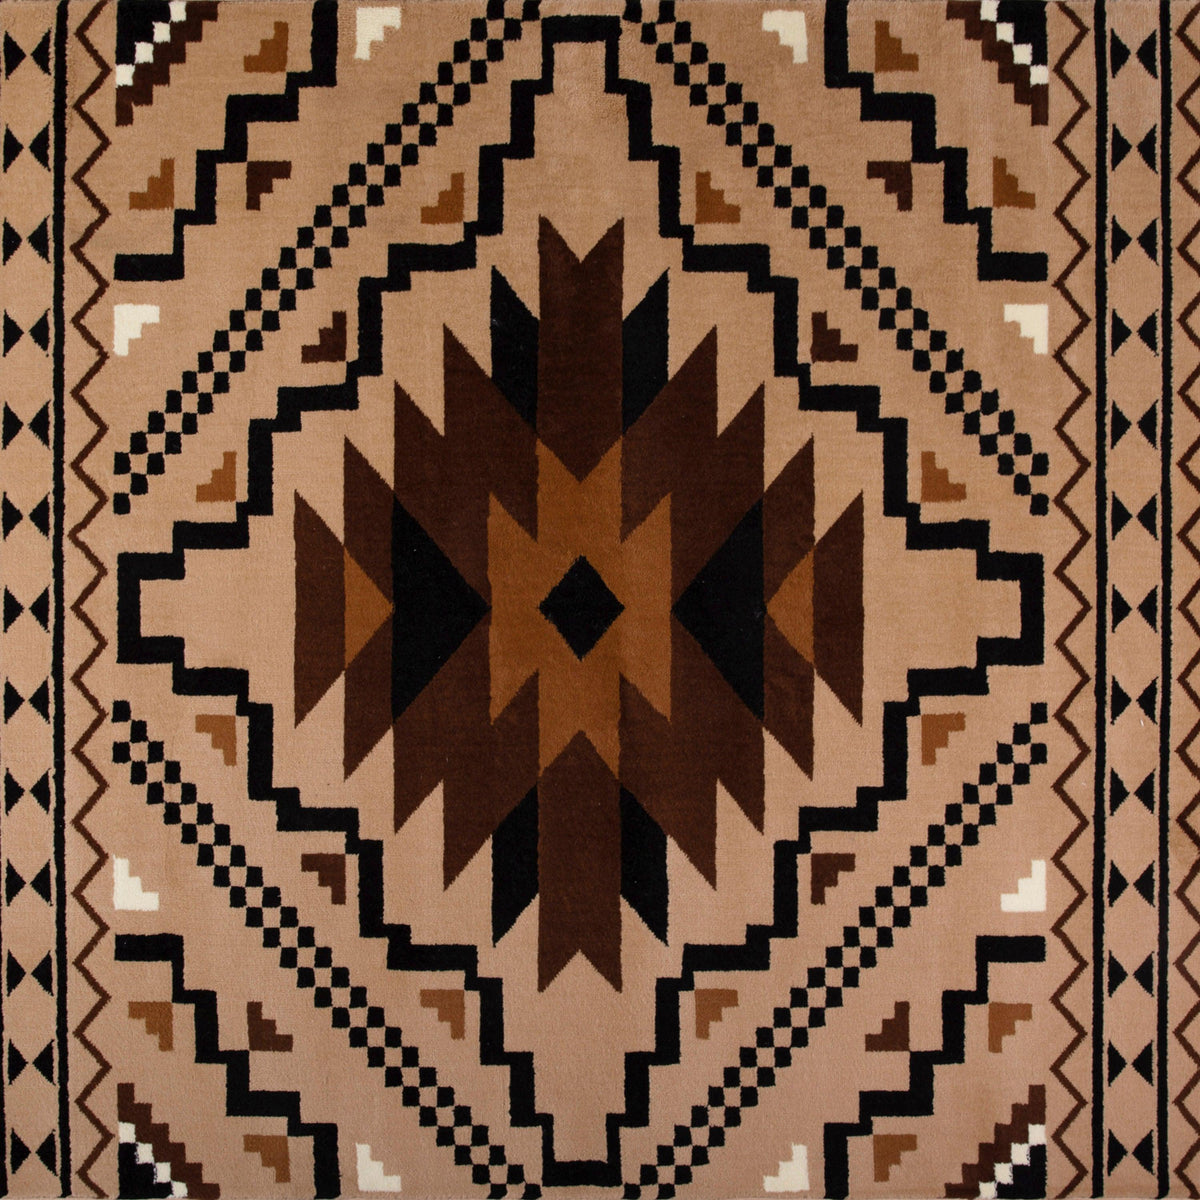 Brown,5' x 7' |#| Southwestern Style Diamond Patterned Indoor Area Rug - Brown - 5' x 7'